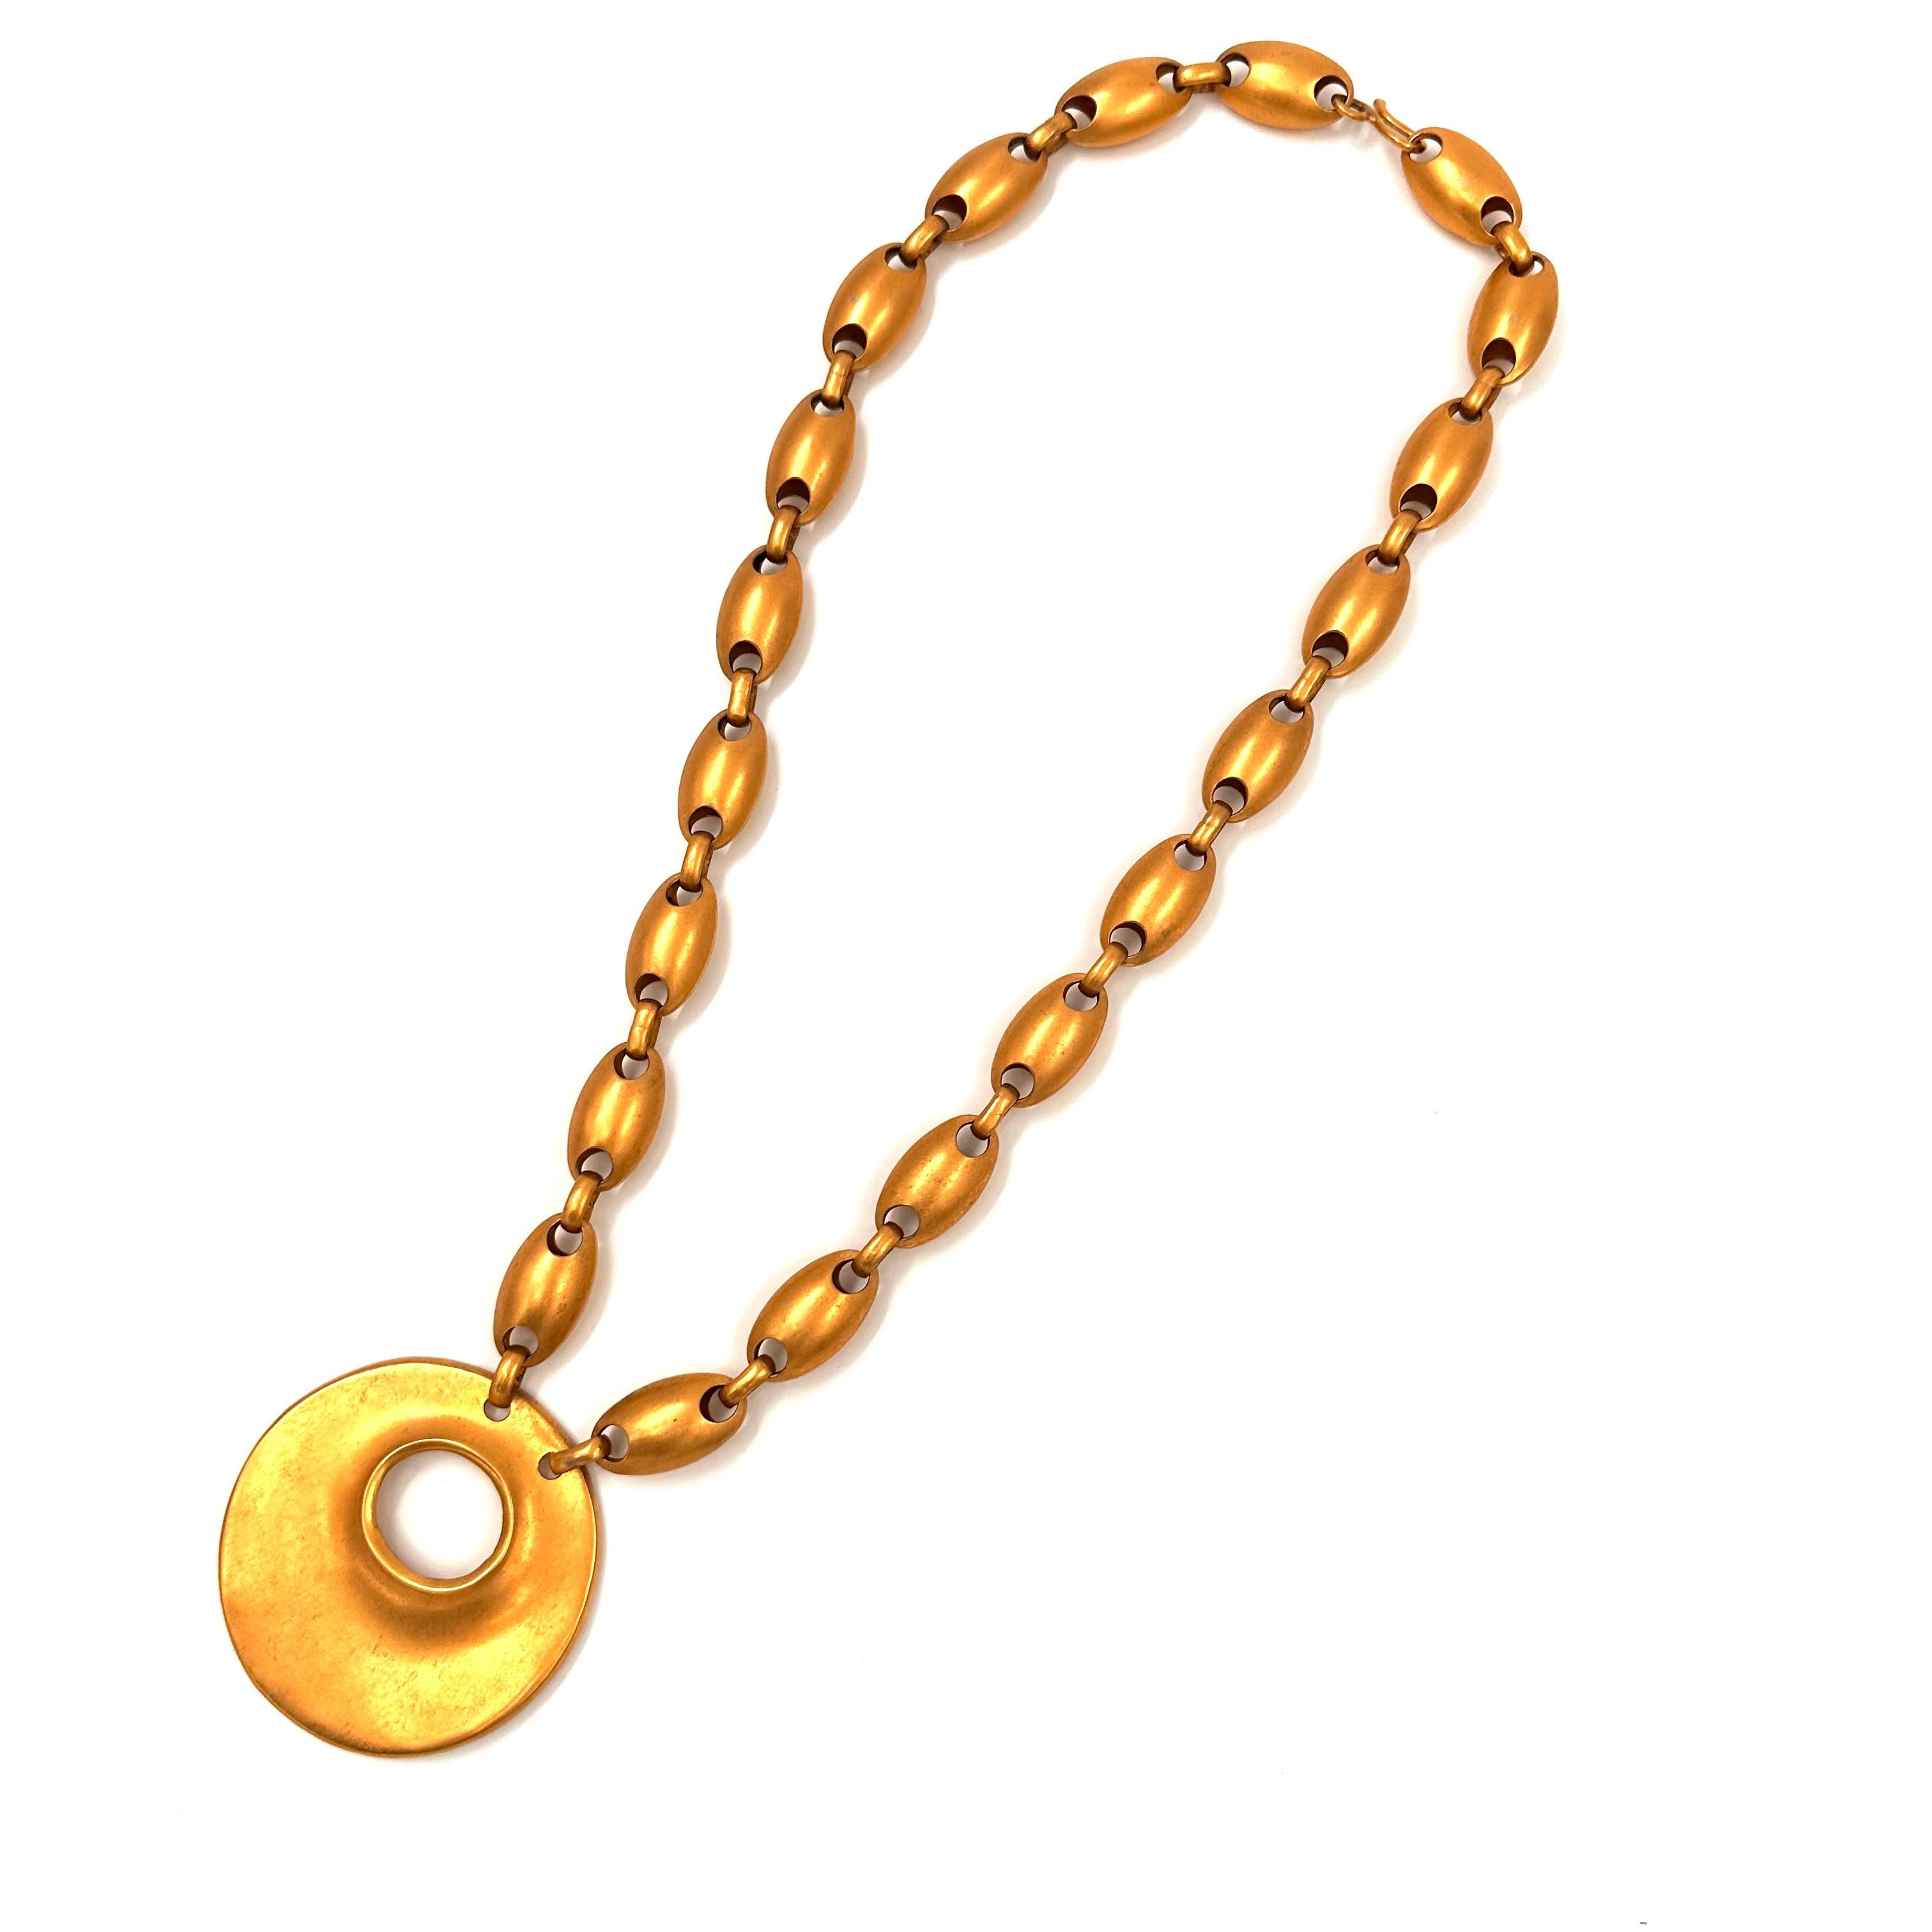 Robert Lee Morris Long Gold Plated Egg Chain Necklace with Crater Pendant, created in 1987. During a period when when Morris was creating Egg themed jewelry, including using soft rounded pebbles there was a push for bigger volume with less weight in